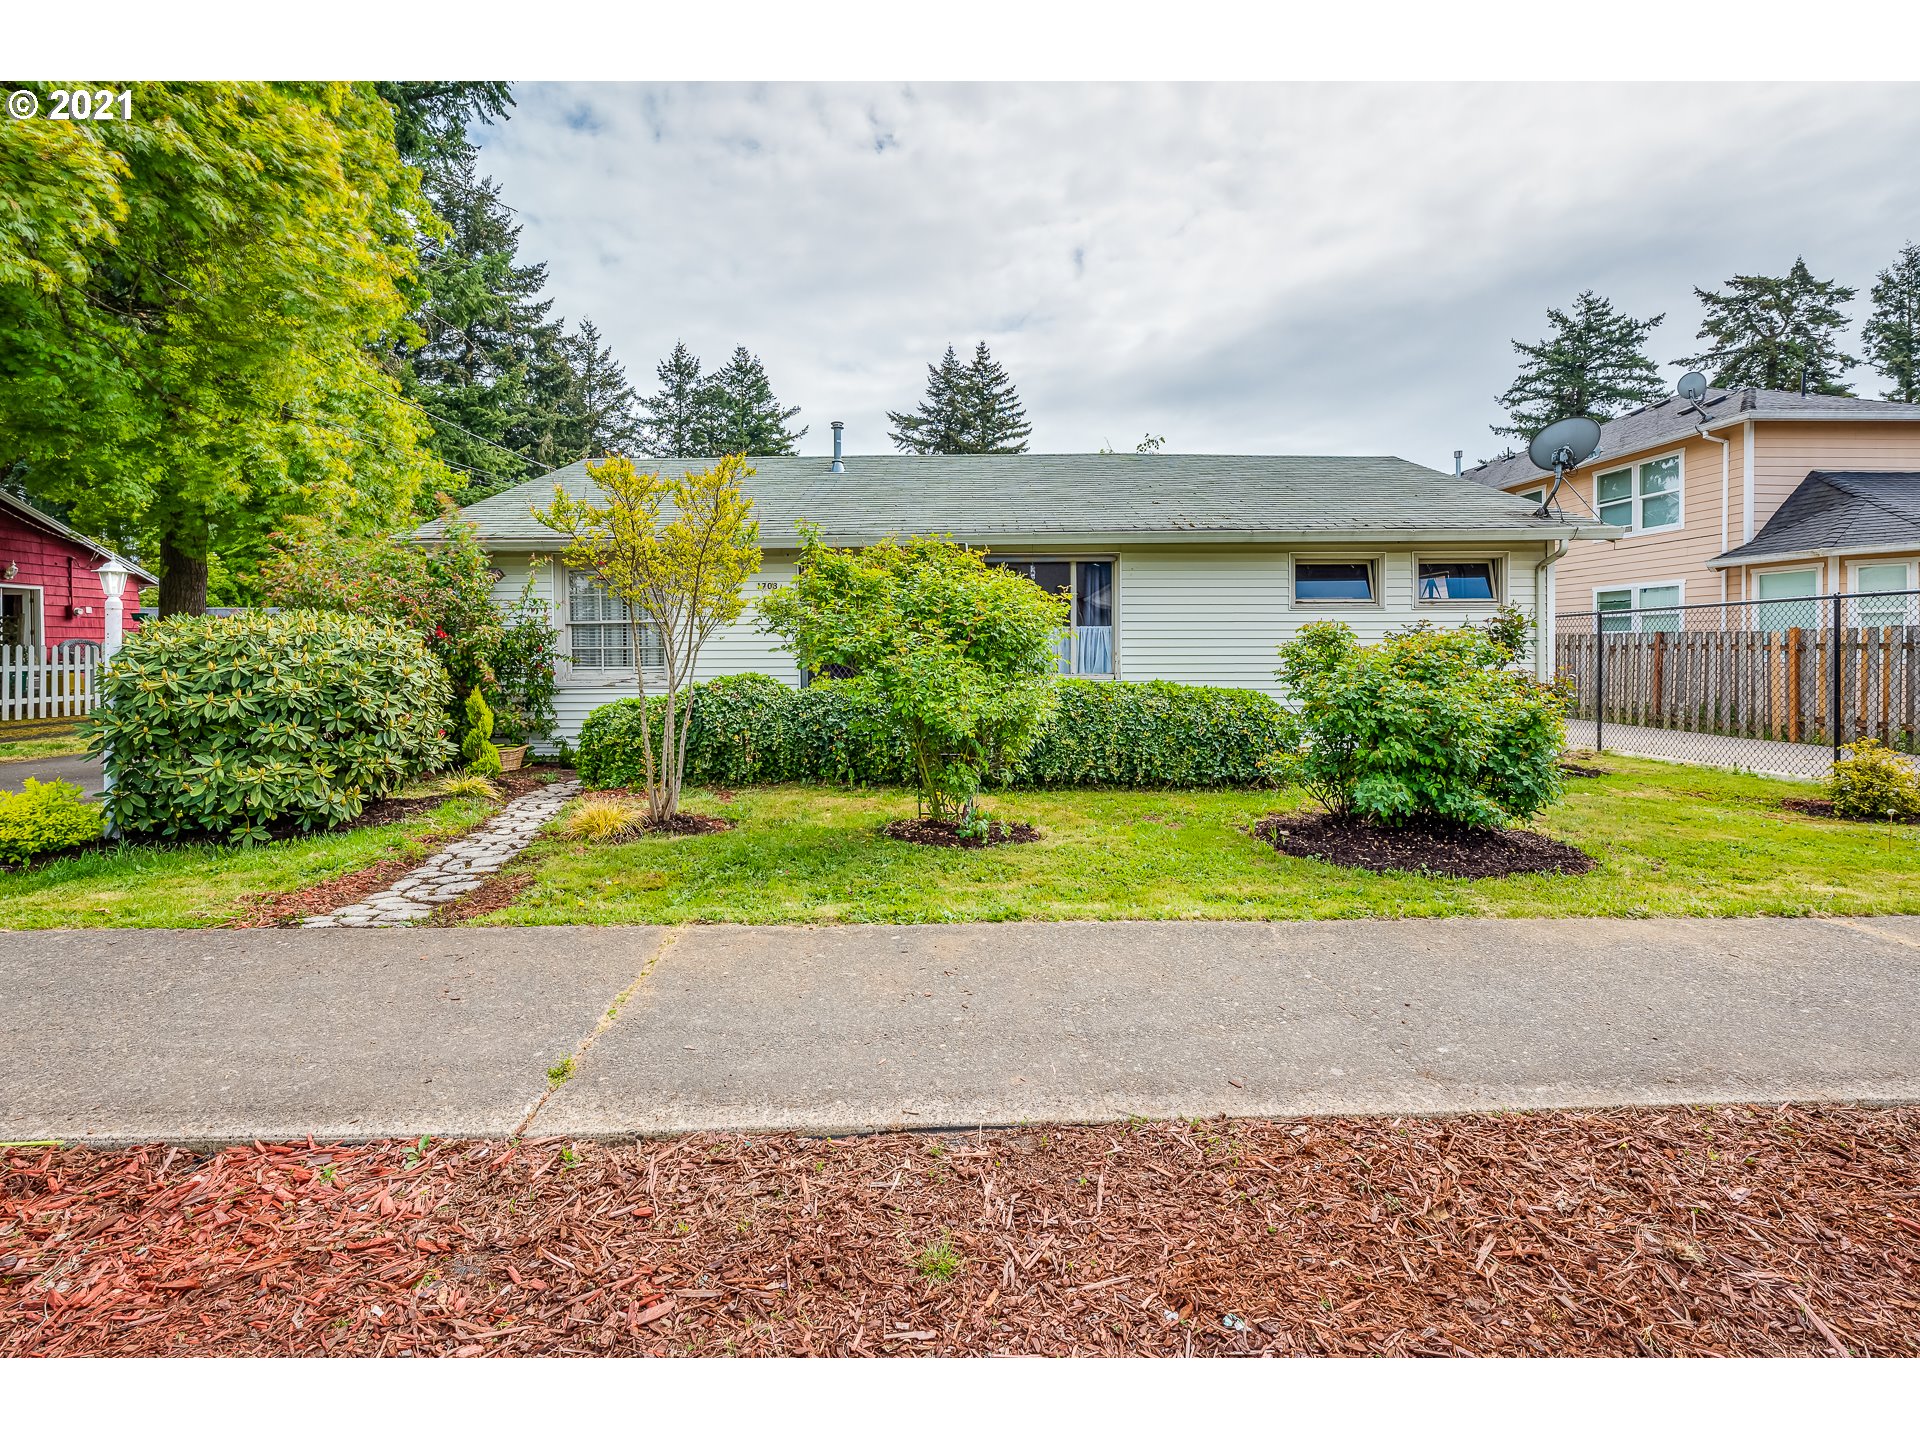 1708 SE 148th AVE (1 of 21)